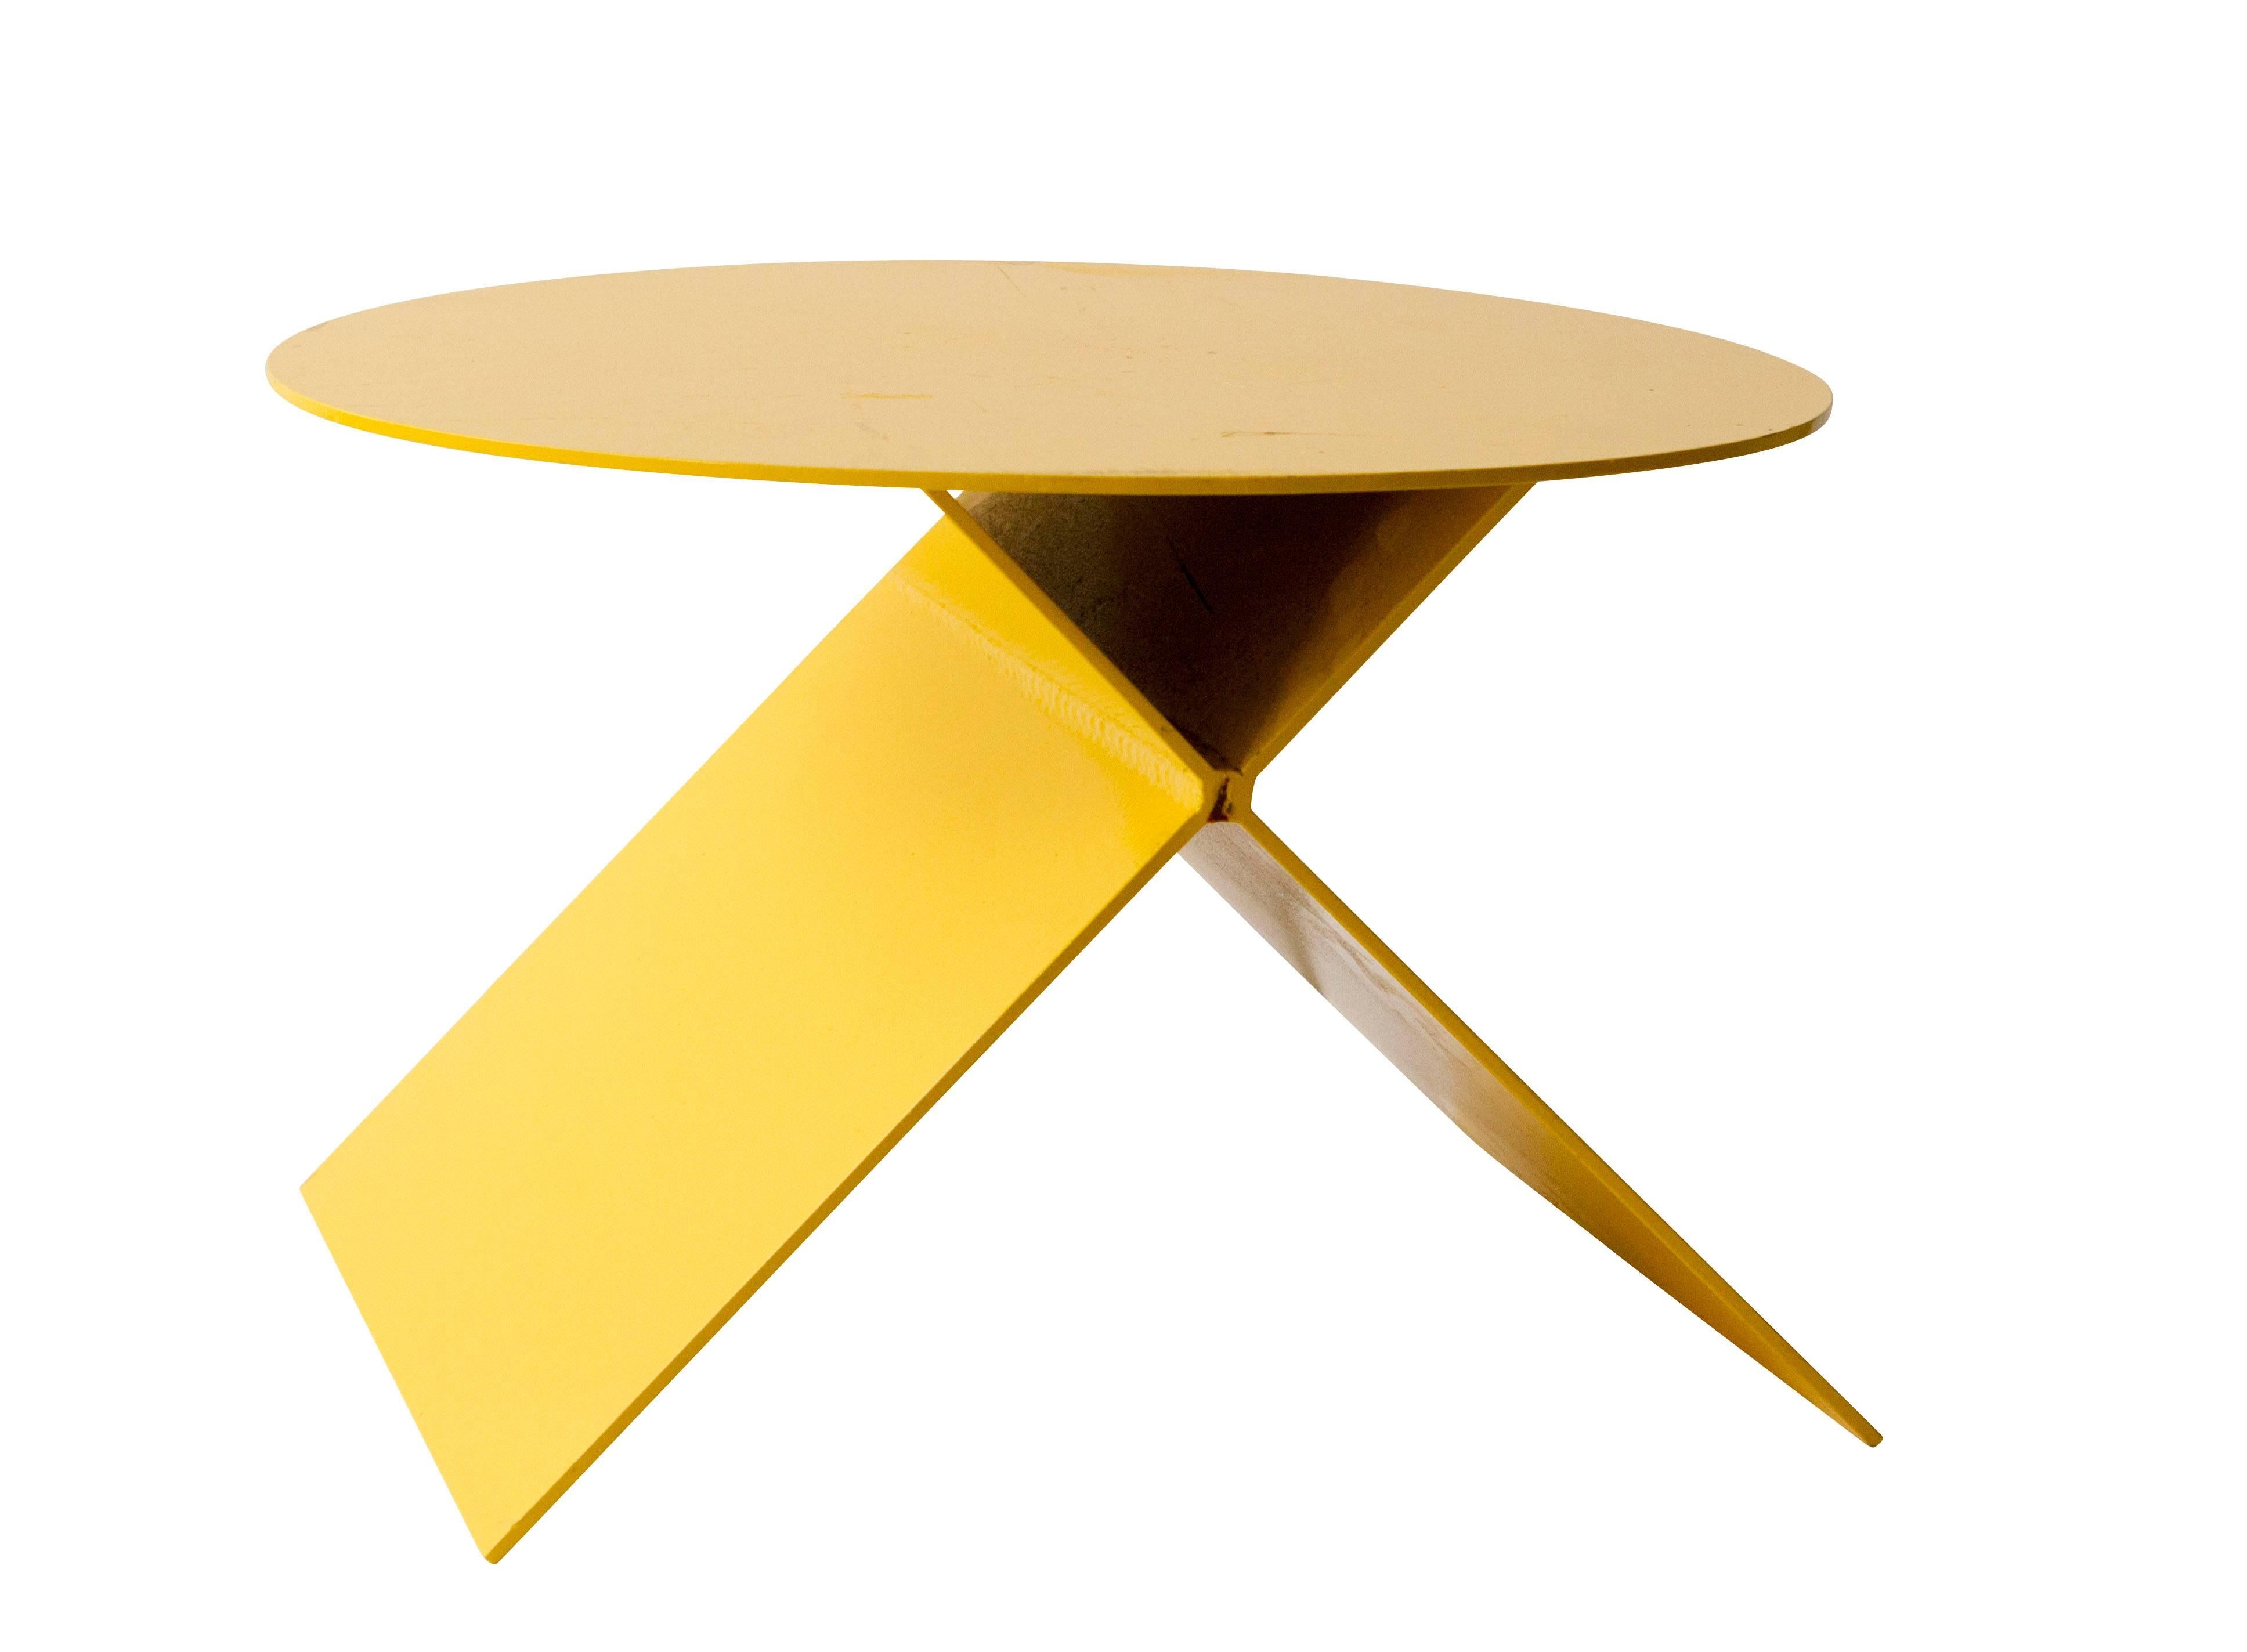 Modern steel plate side table in chromium yellow.